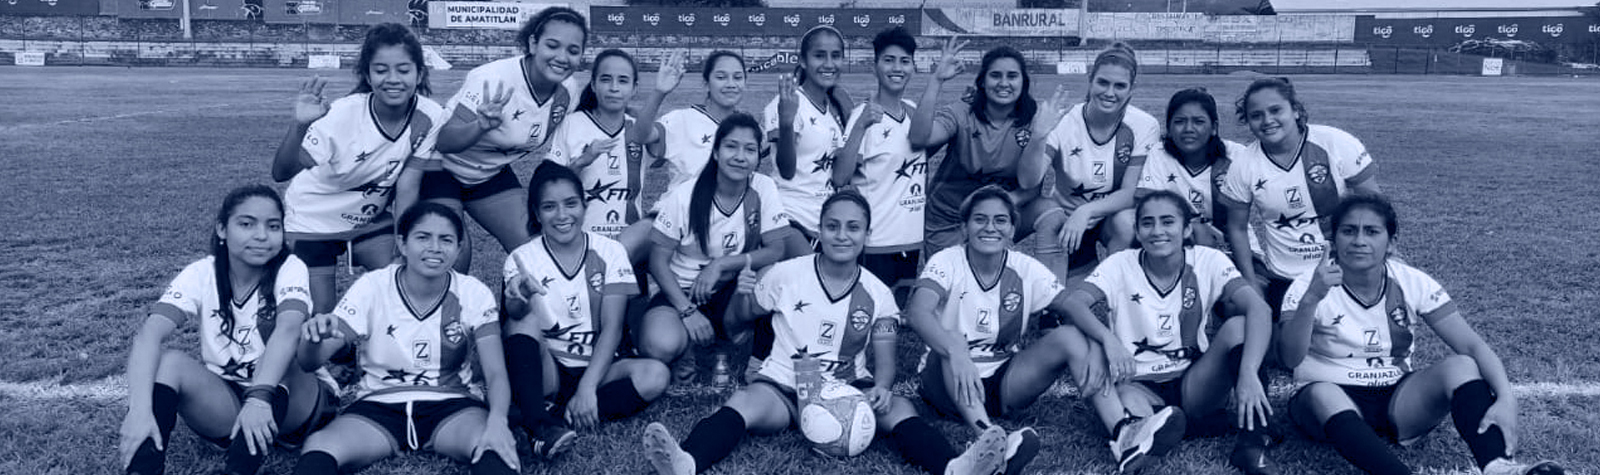 The First Sustainable Women’s Football Team in Latin America